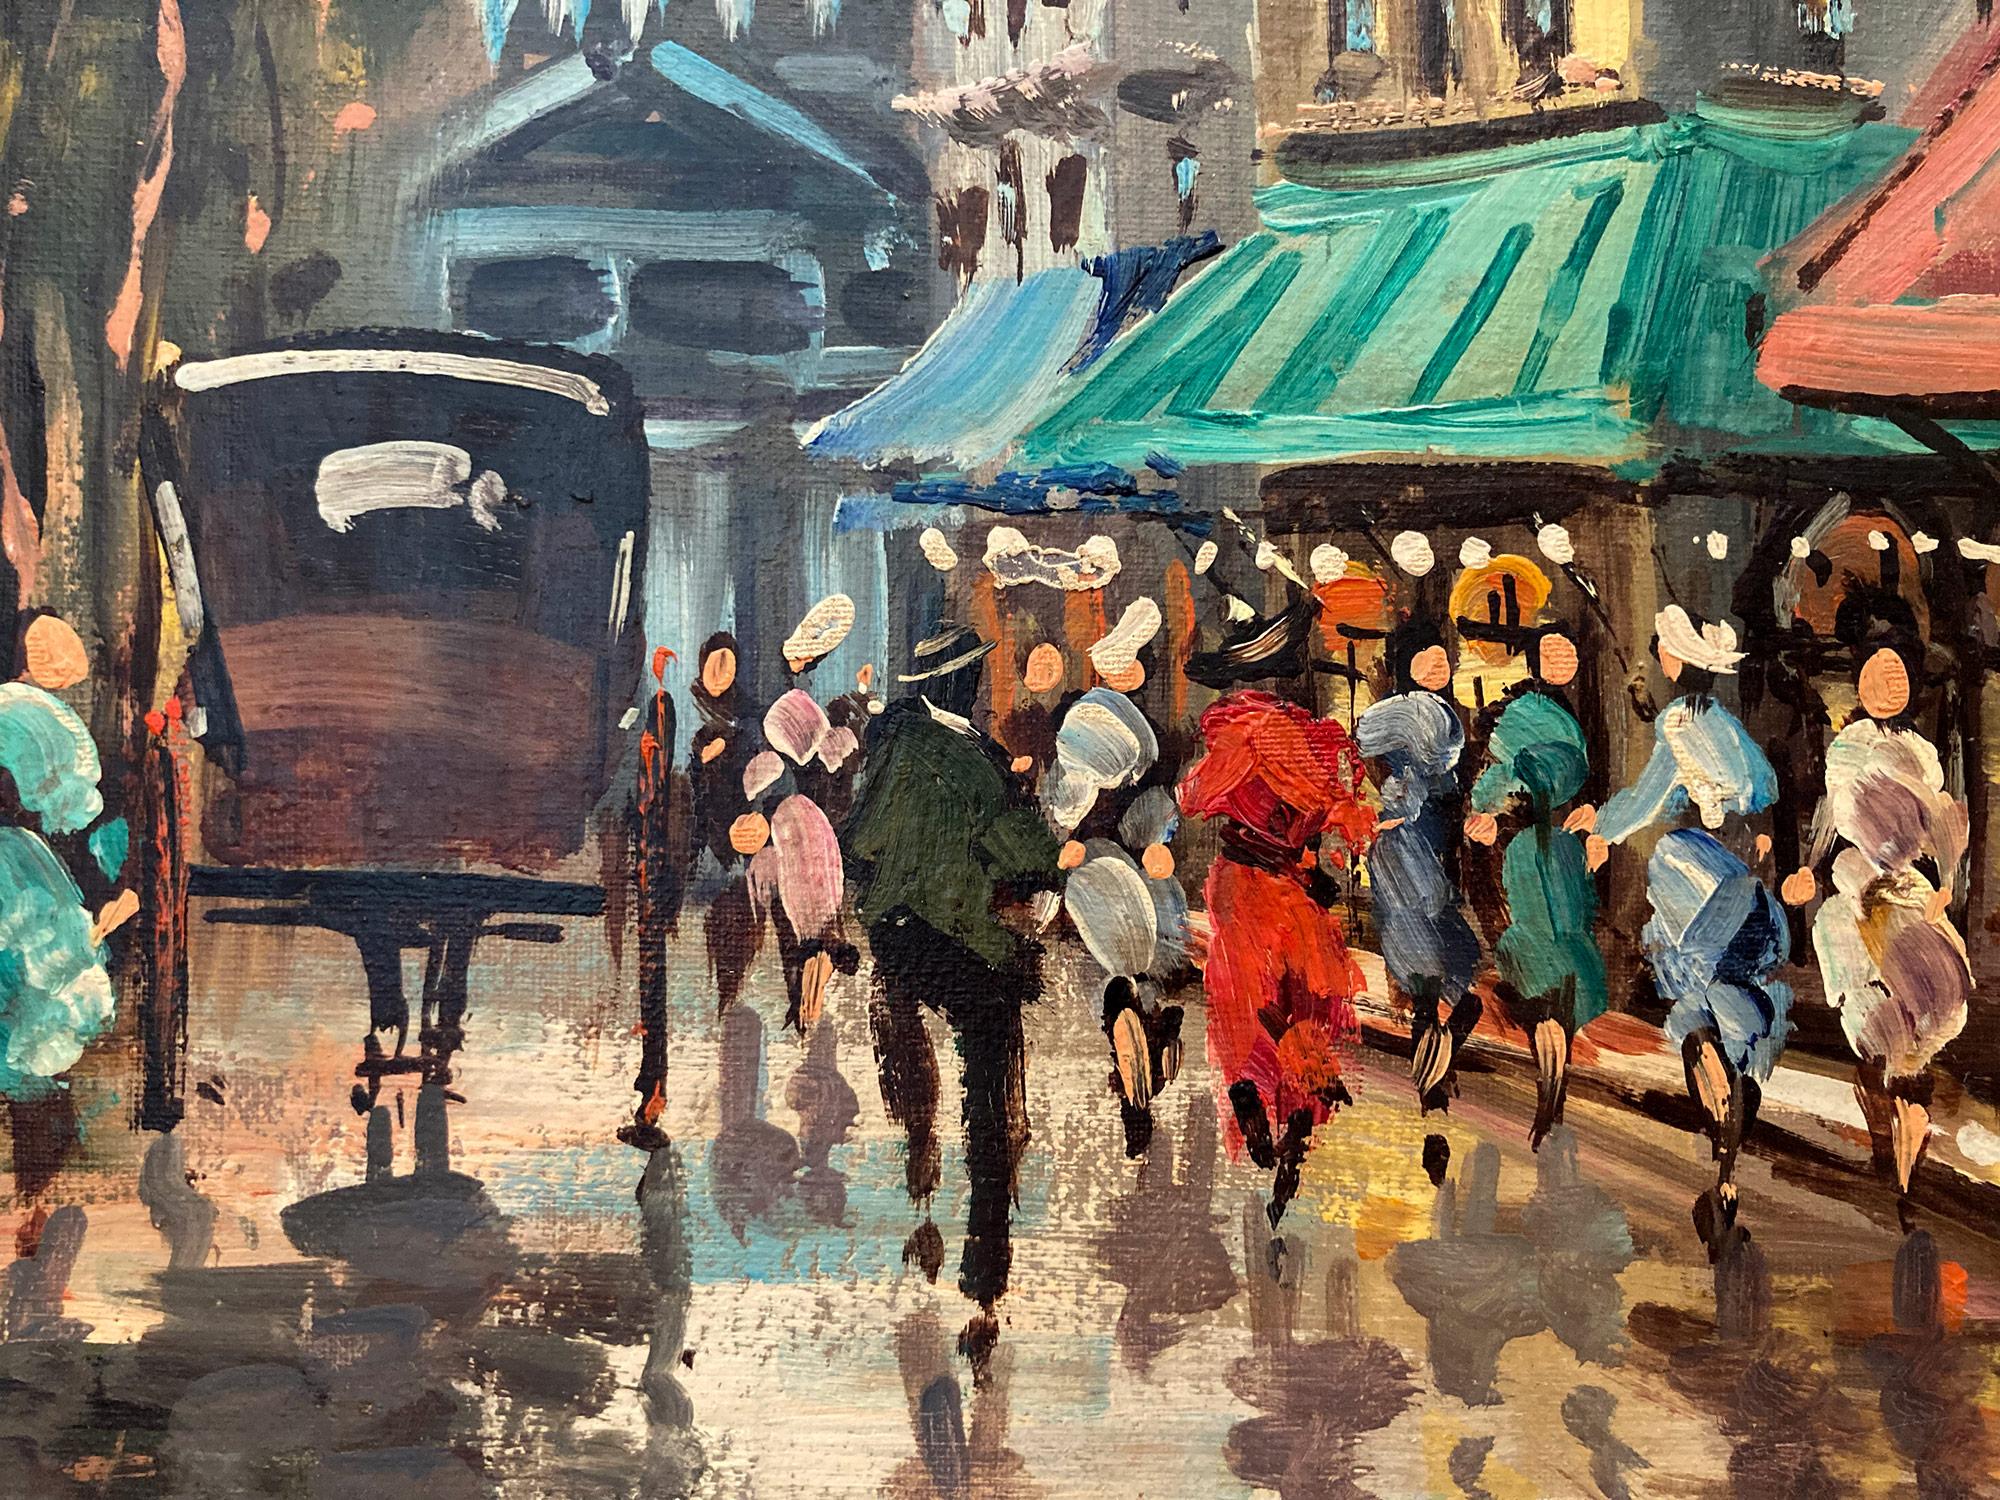 In this piece, the artist depicts his subject in a whimsical and impressionistic way, capturing the Cafés of the busy streets from the 20th Century with much life. In the distance we see Montmartre, it is primarily known for its artistic history,